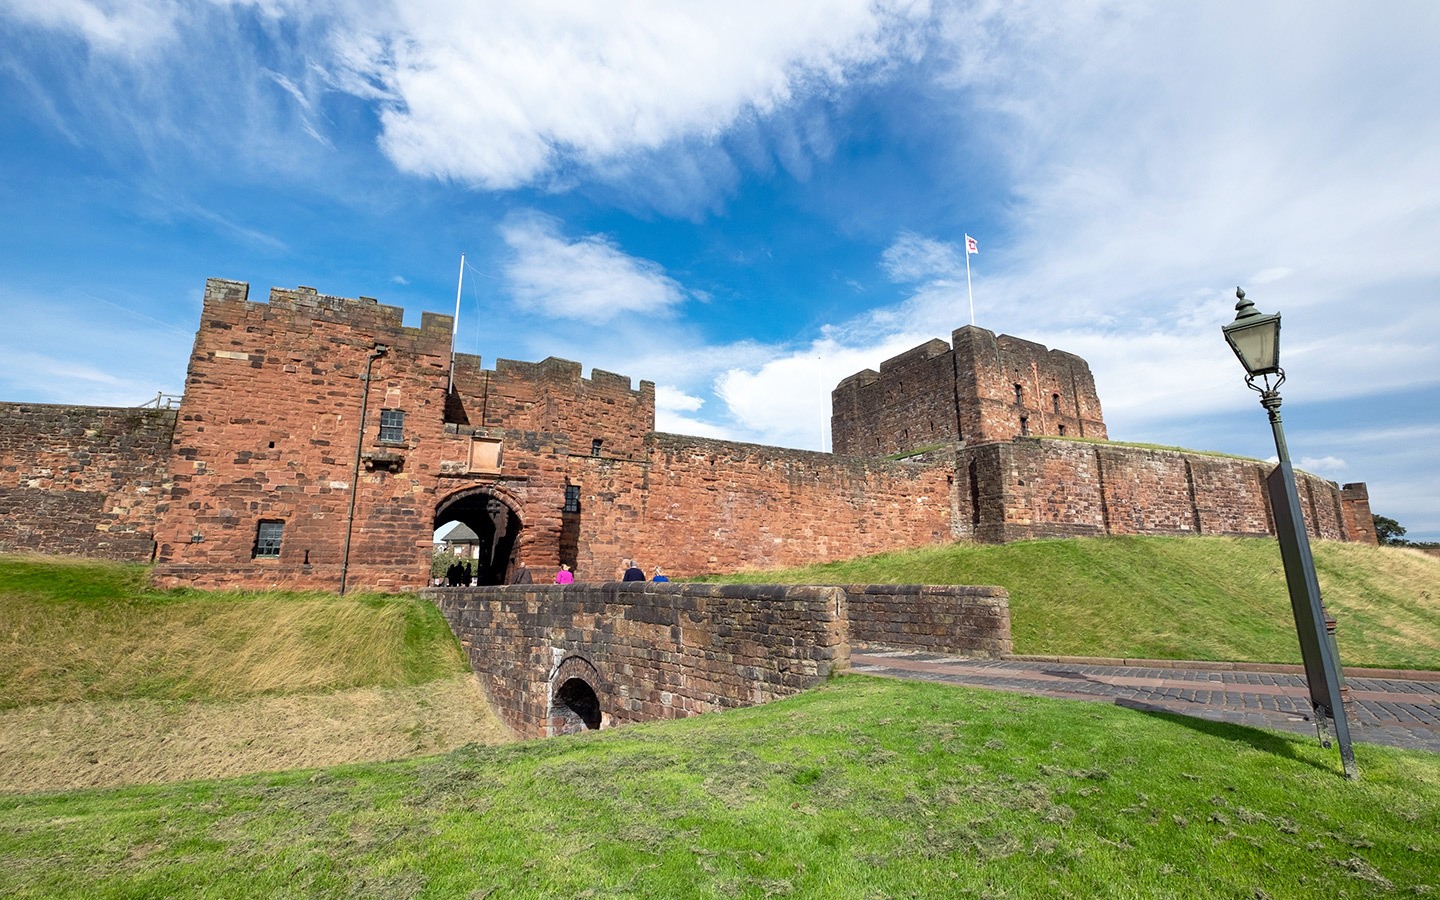 The gates of Carlisle Castle in north-west England